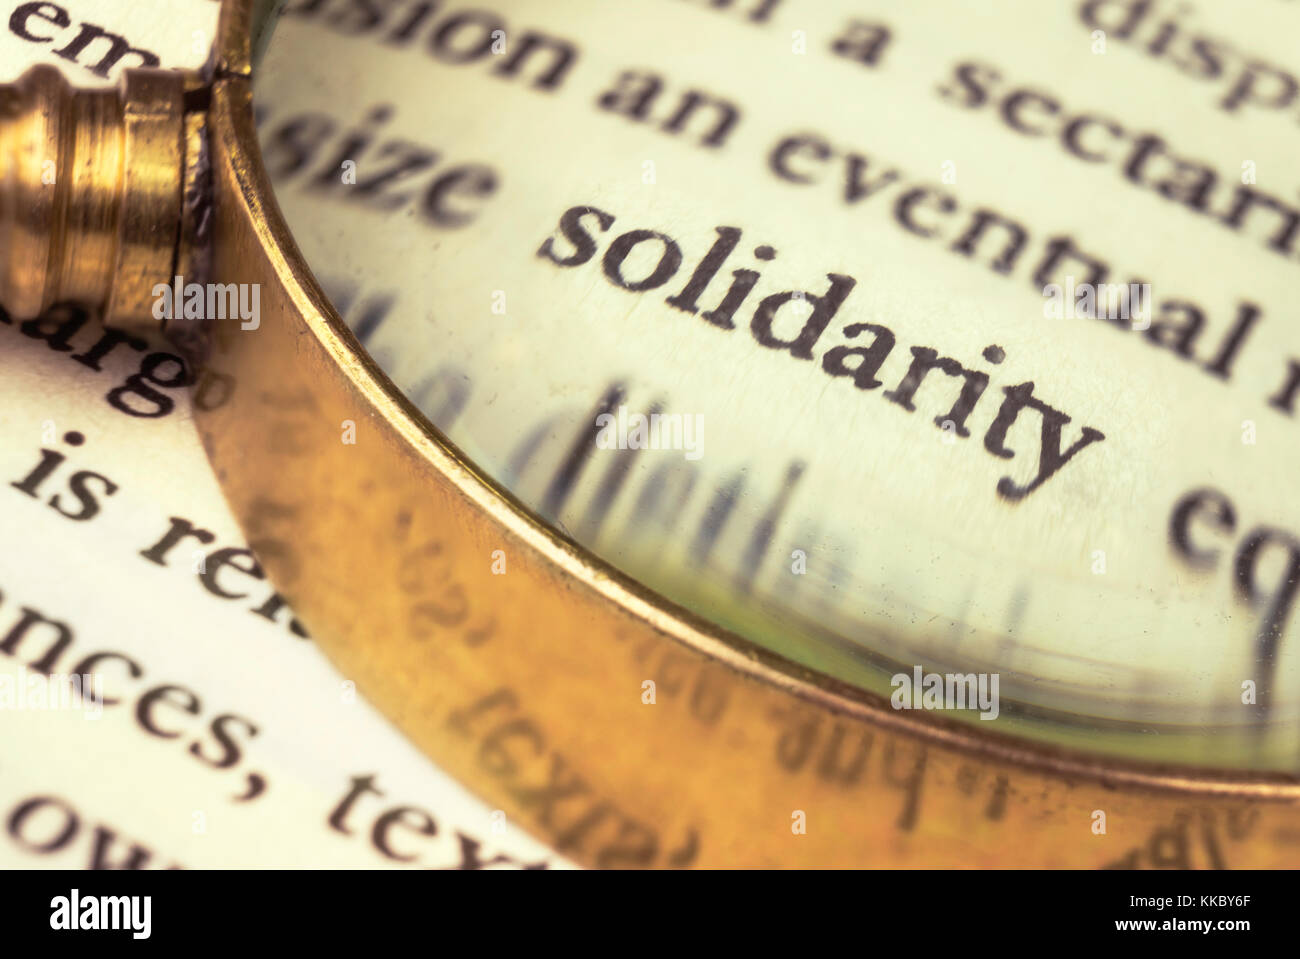 The word 'solidarity' emphasized by a magnifying glass and wrapped with blurry text. Stock Photo